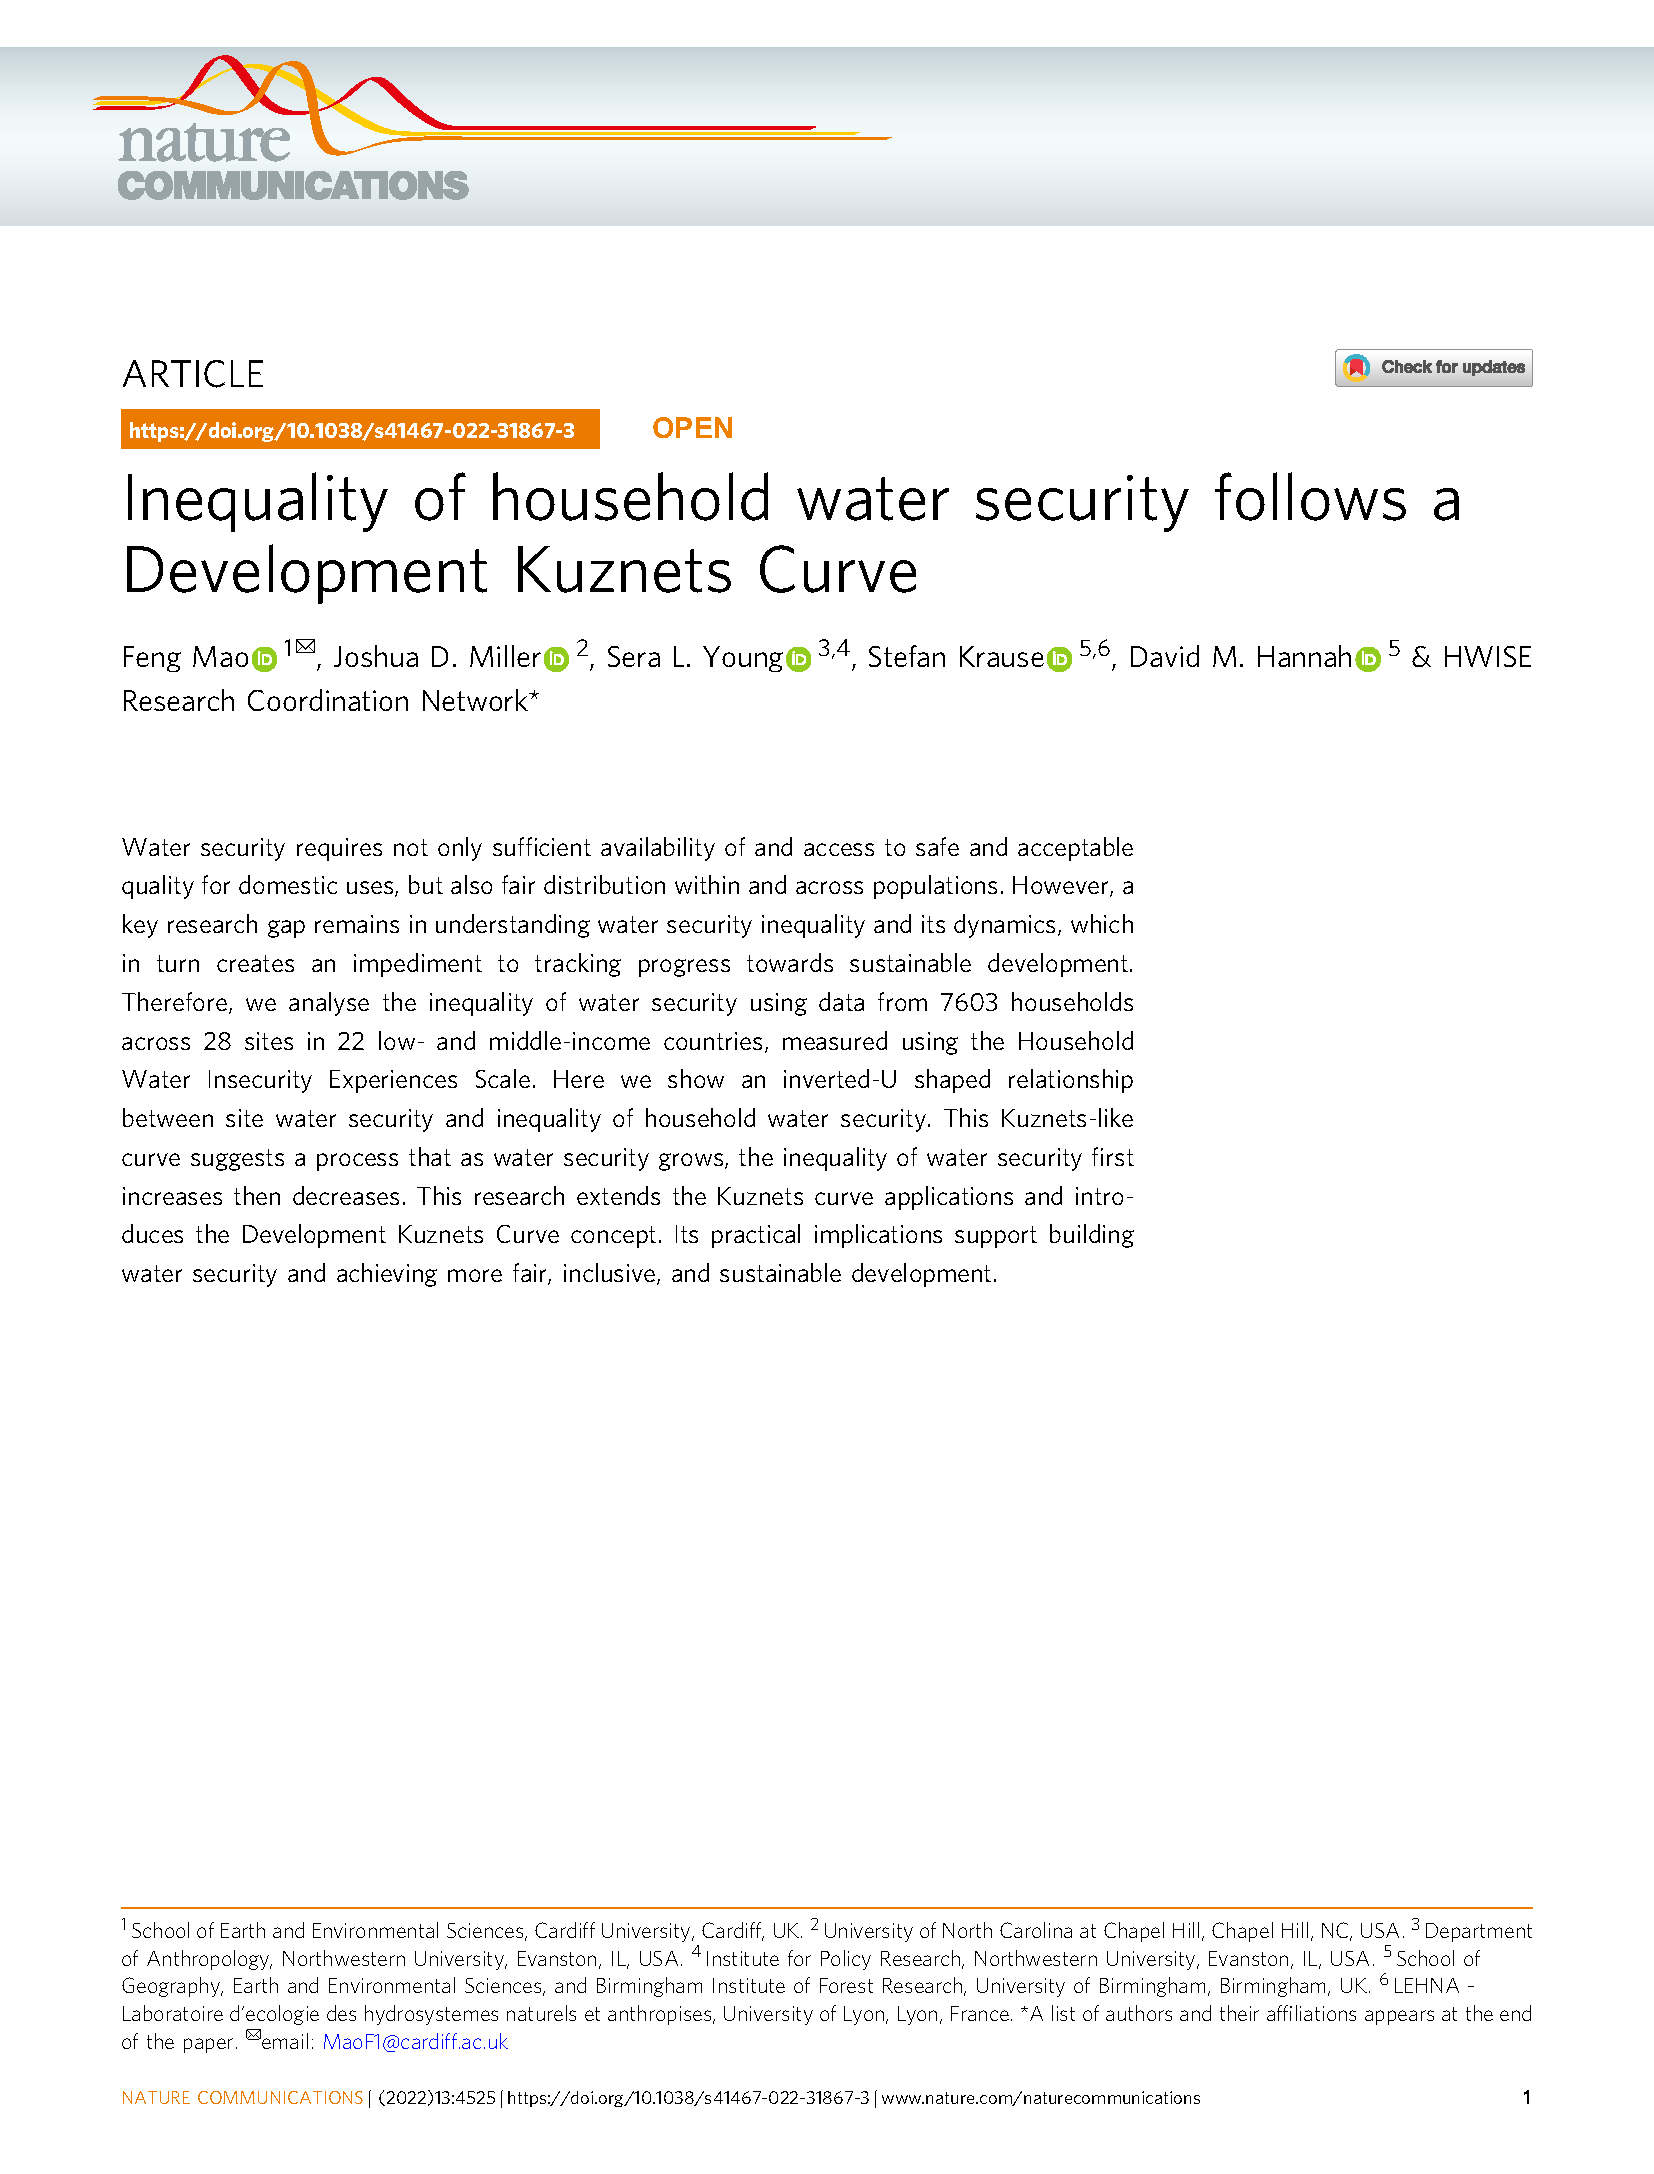 Cover page for Inequality of Household Water Security Follows a Development Kuznets Curve